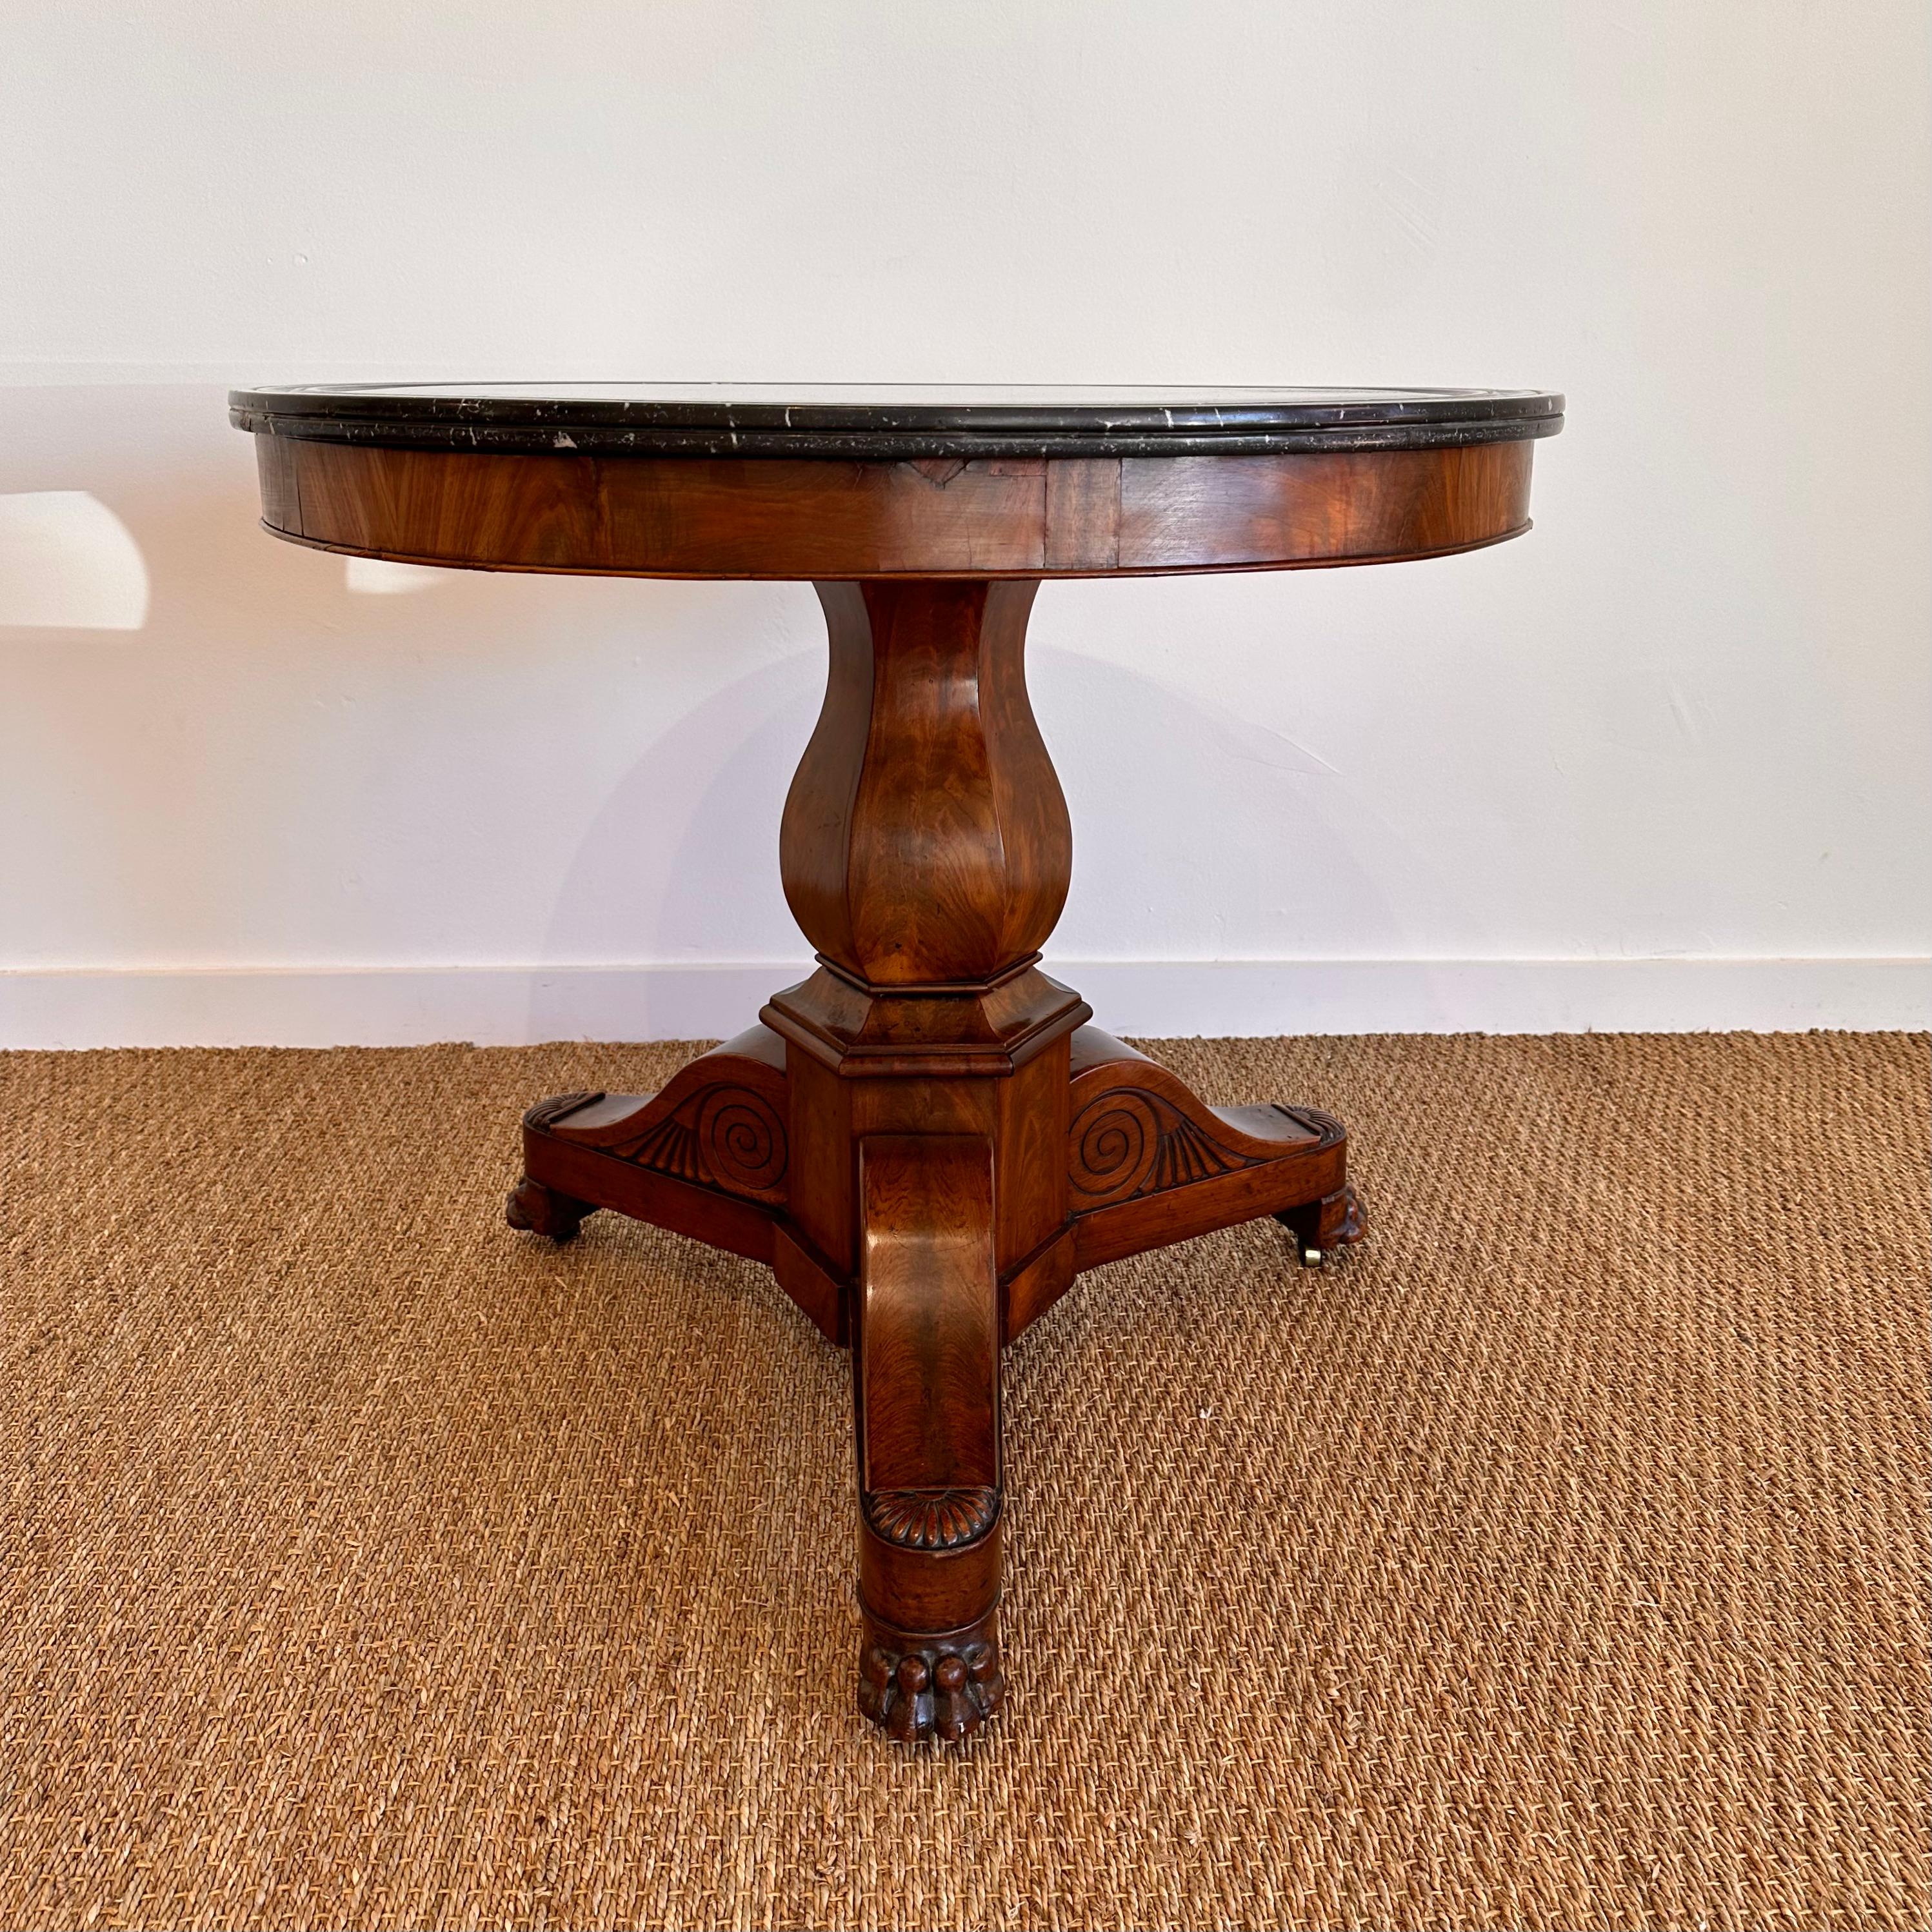 Charles X Period Mahogany and Marble center table.   Carved tripod base with urn shaped pedestal. Beautiful silhouette.  